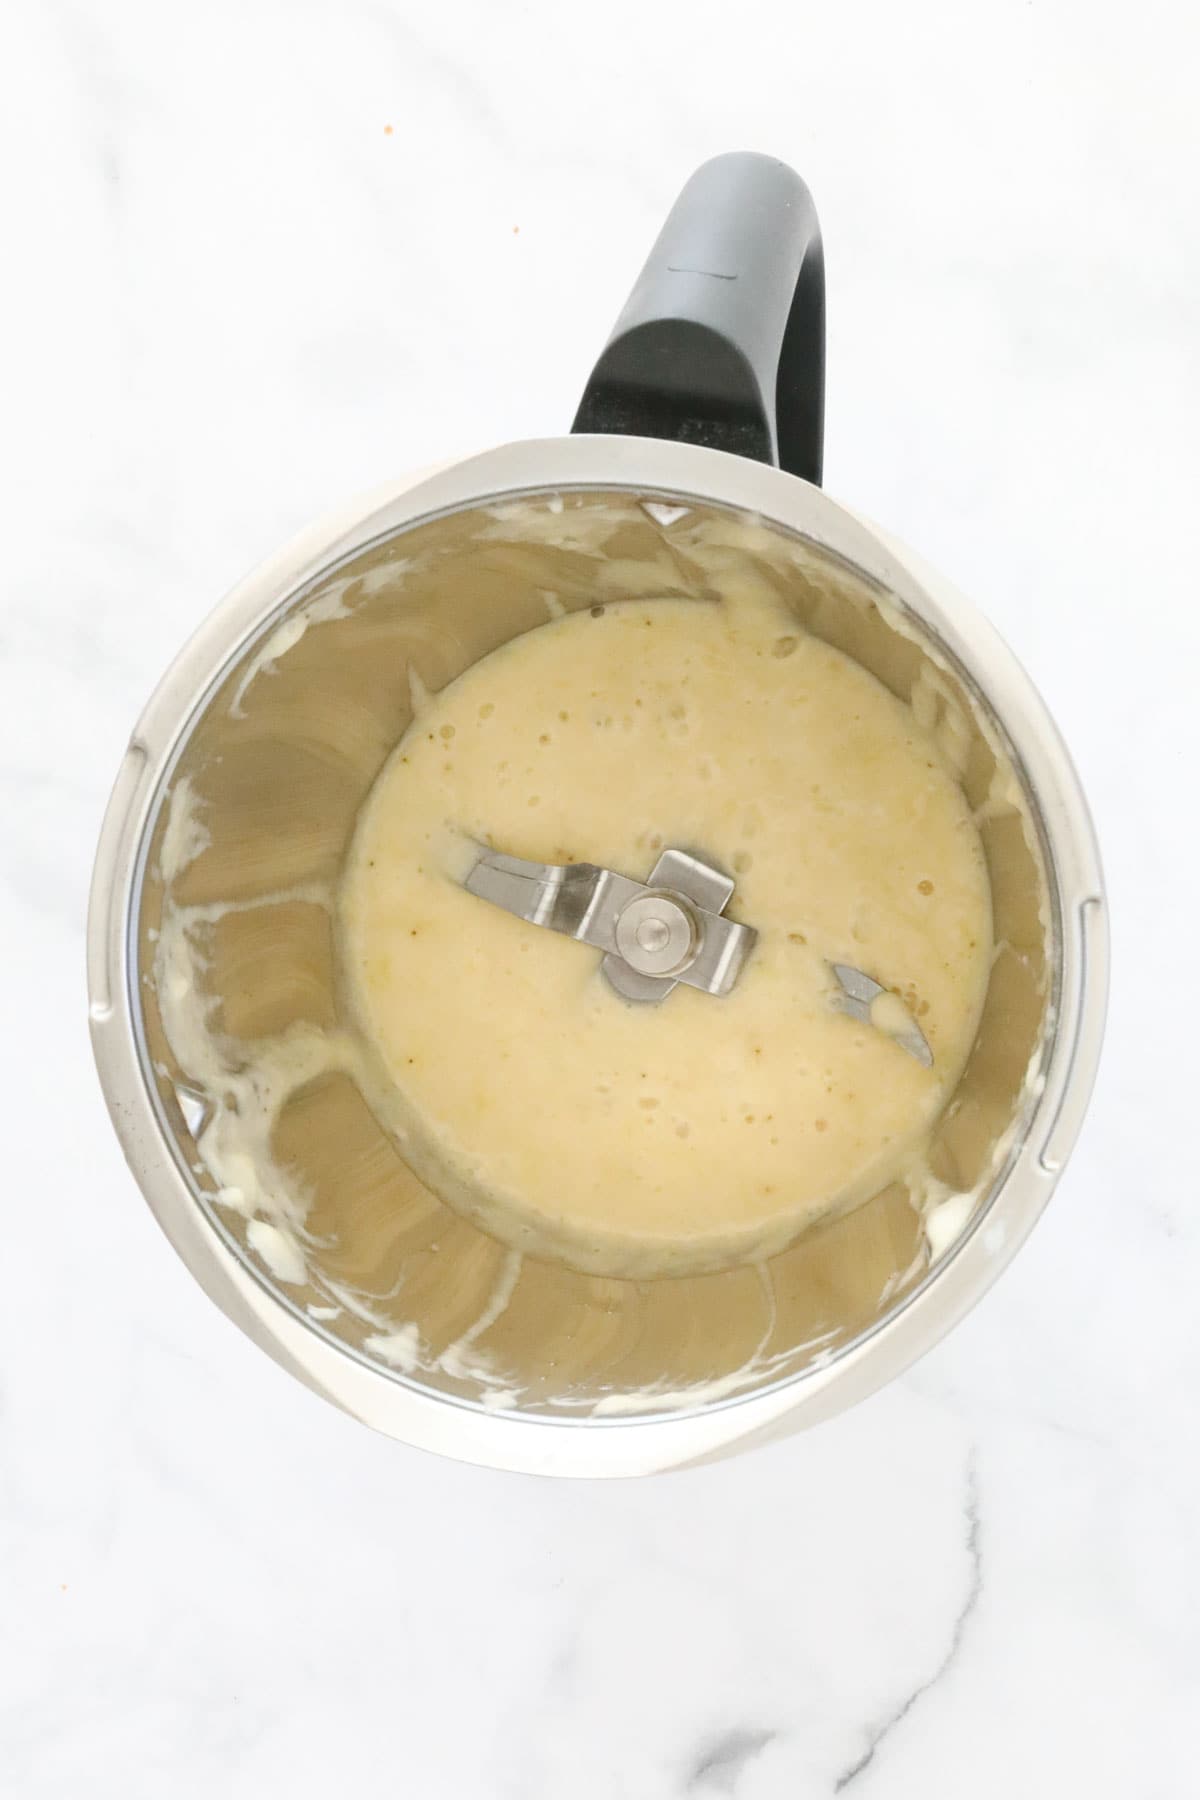 Mashed banana in a Thermomix.